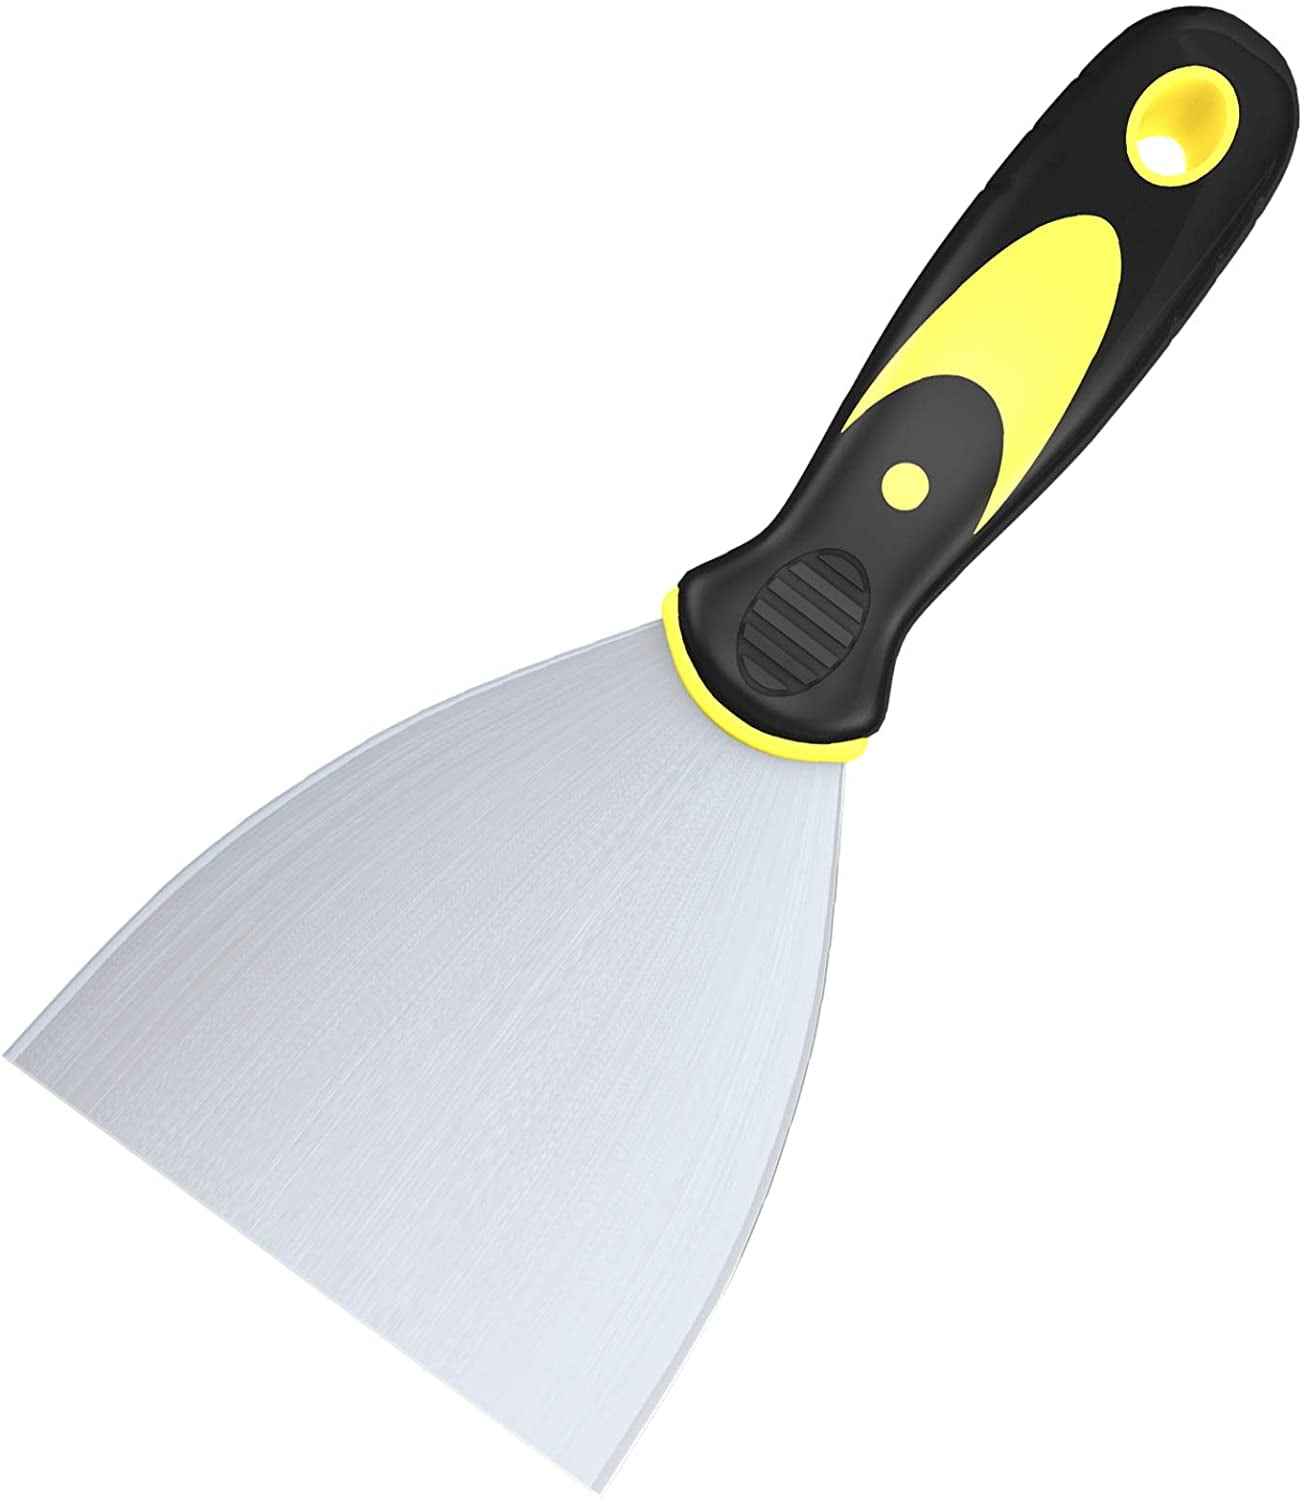 Putty Knife Scrapers, 1.5 Inch Spackle Knife, Metal Scraper Tool for  Drywall Finishing, Plaster Scraping, Decals, and Wallpaper